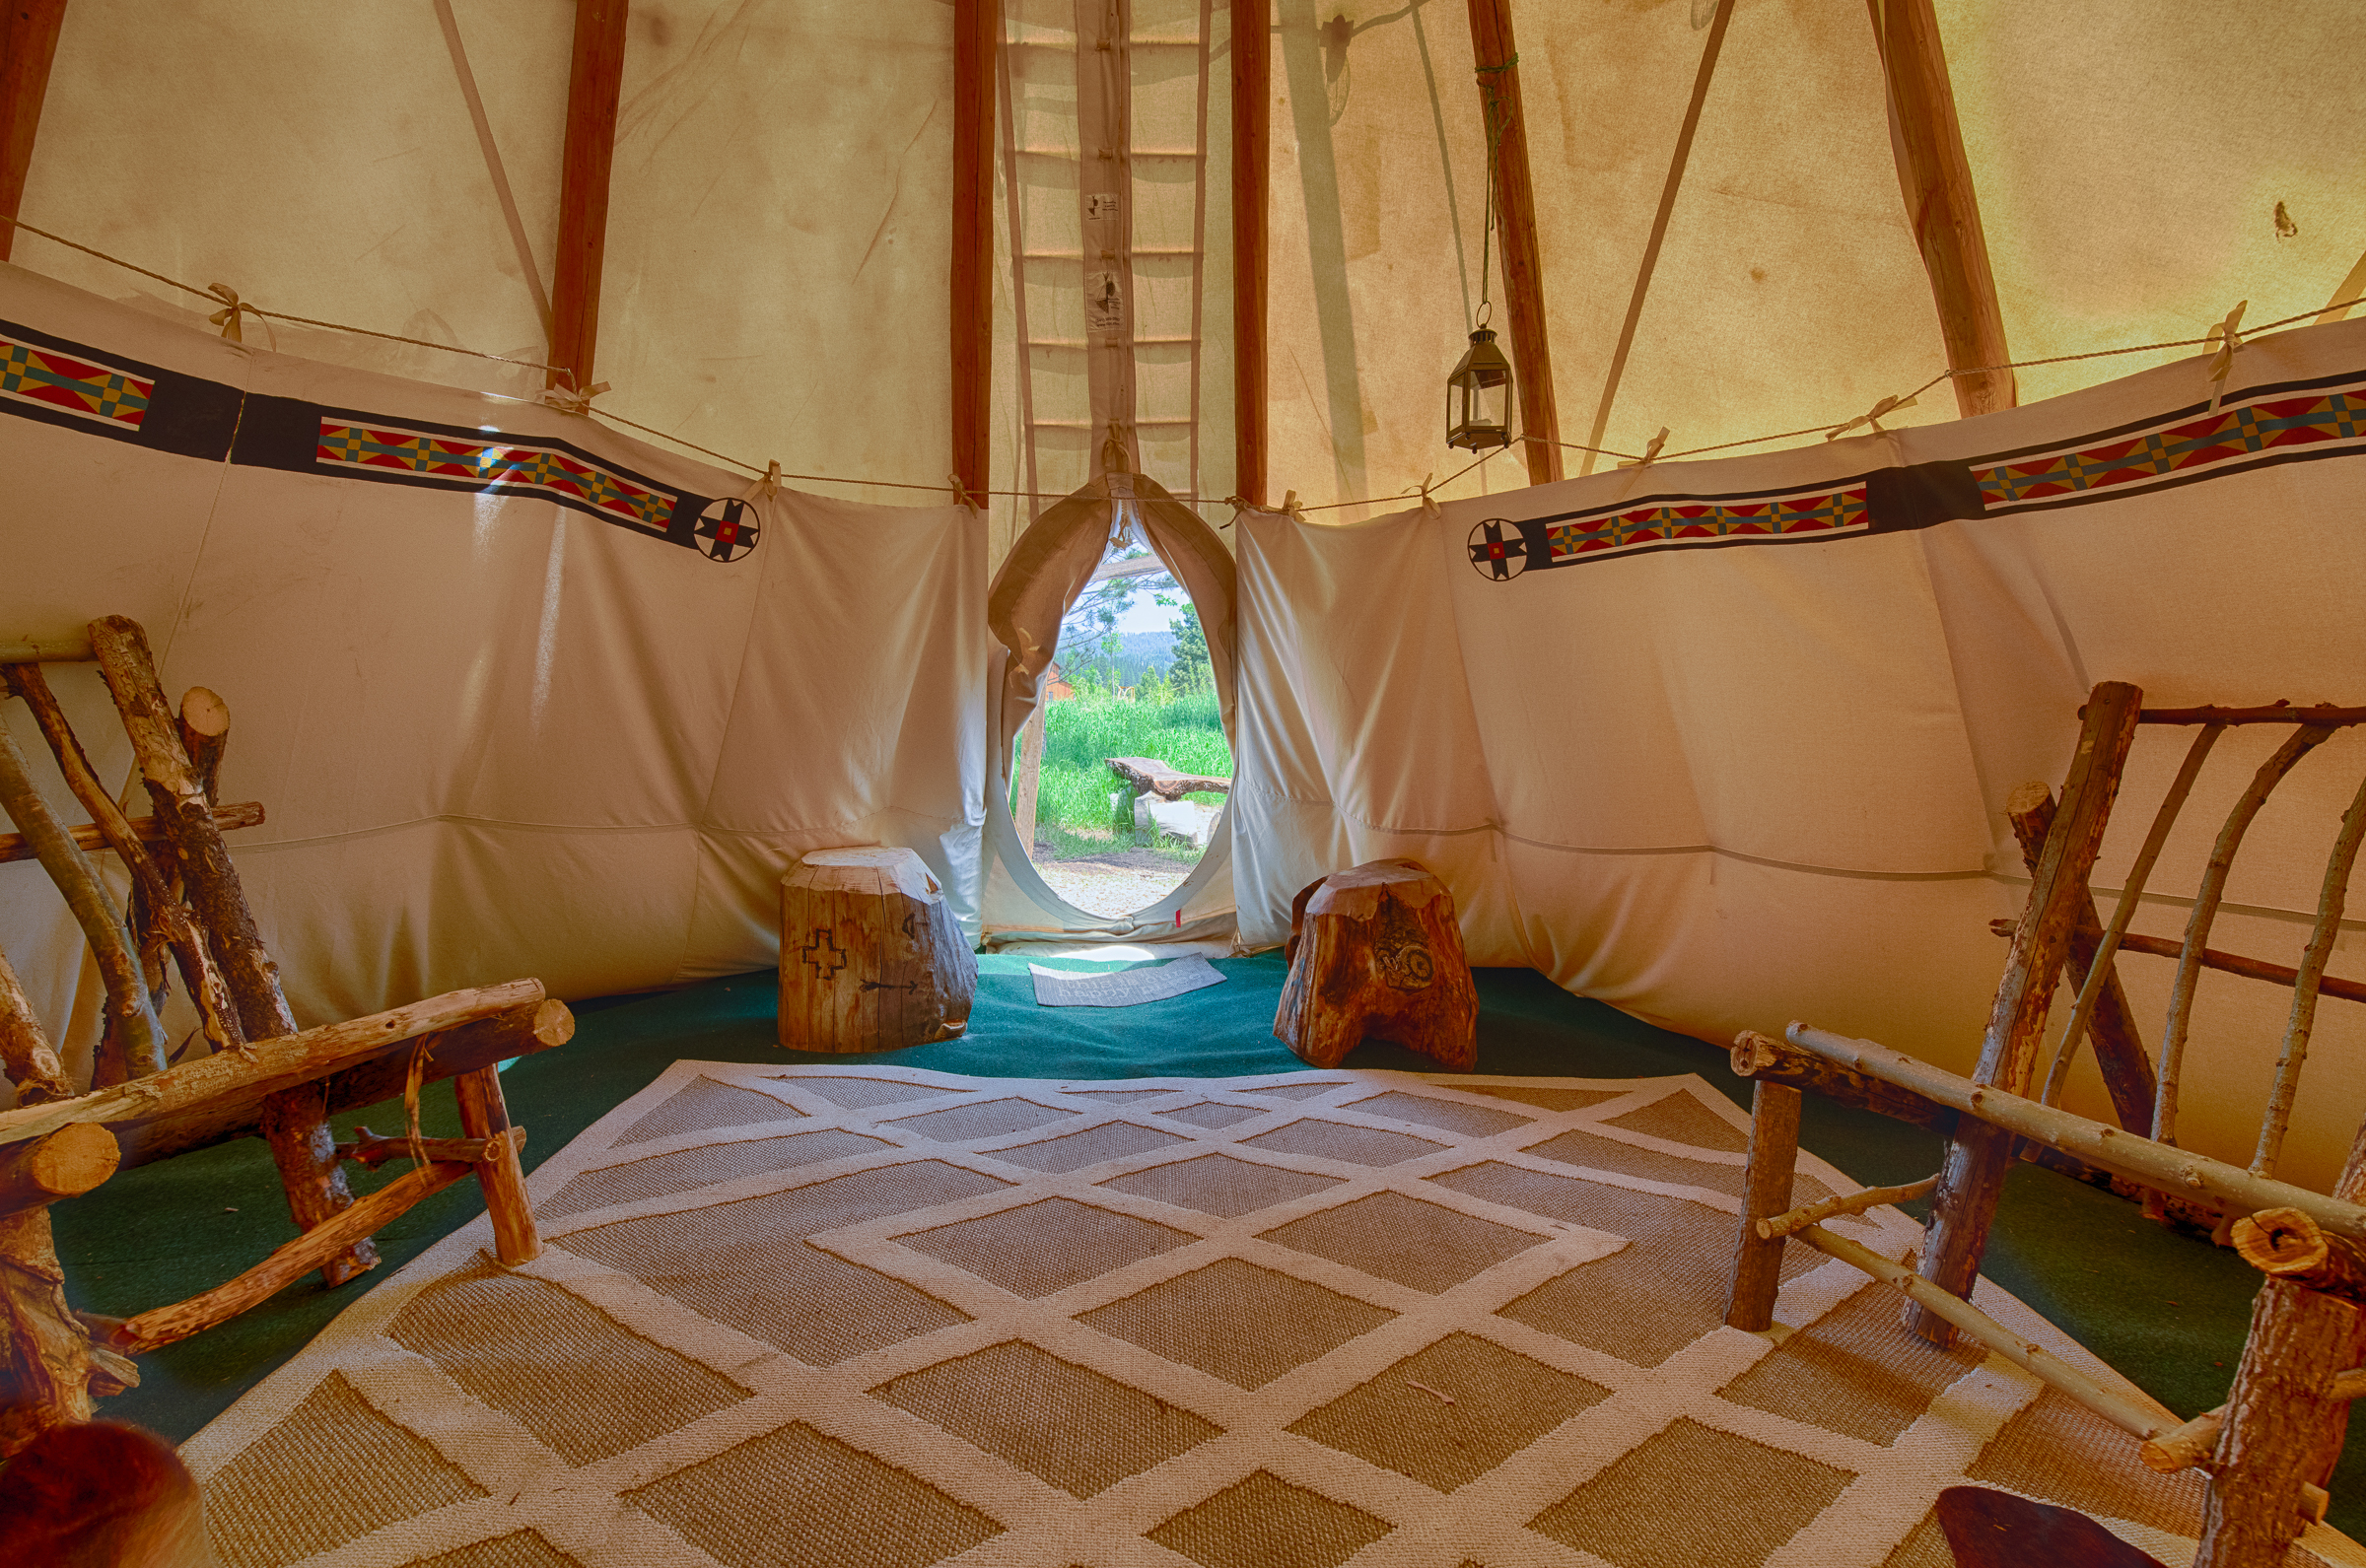 Tipi interior with custom log furniture, wall to wall carpeting and an area rug. Decorated with American Indian  content.